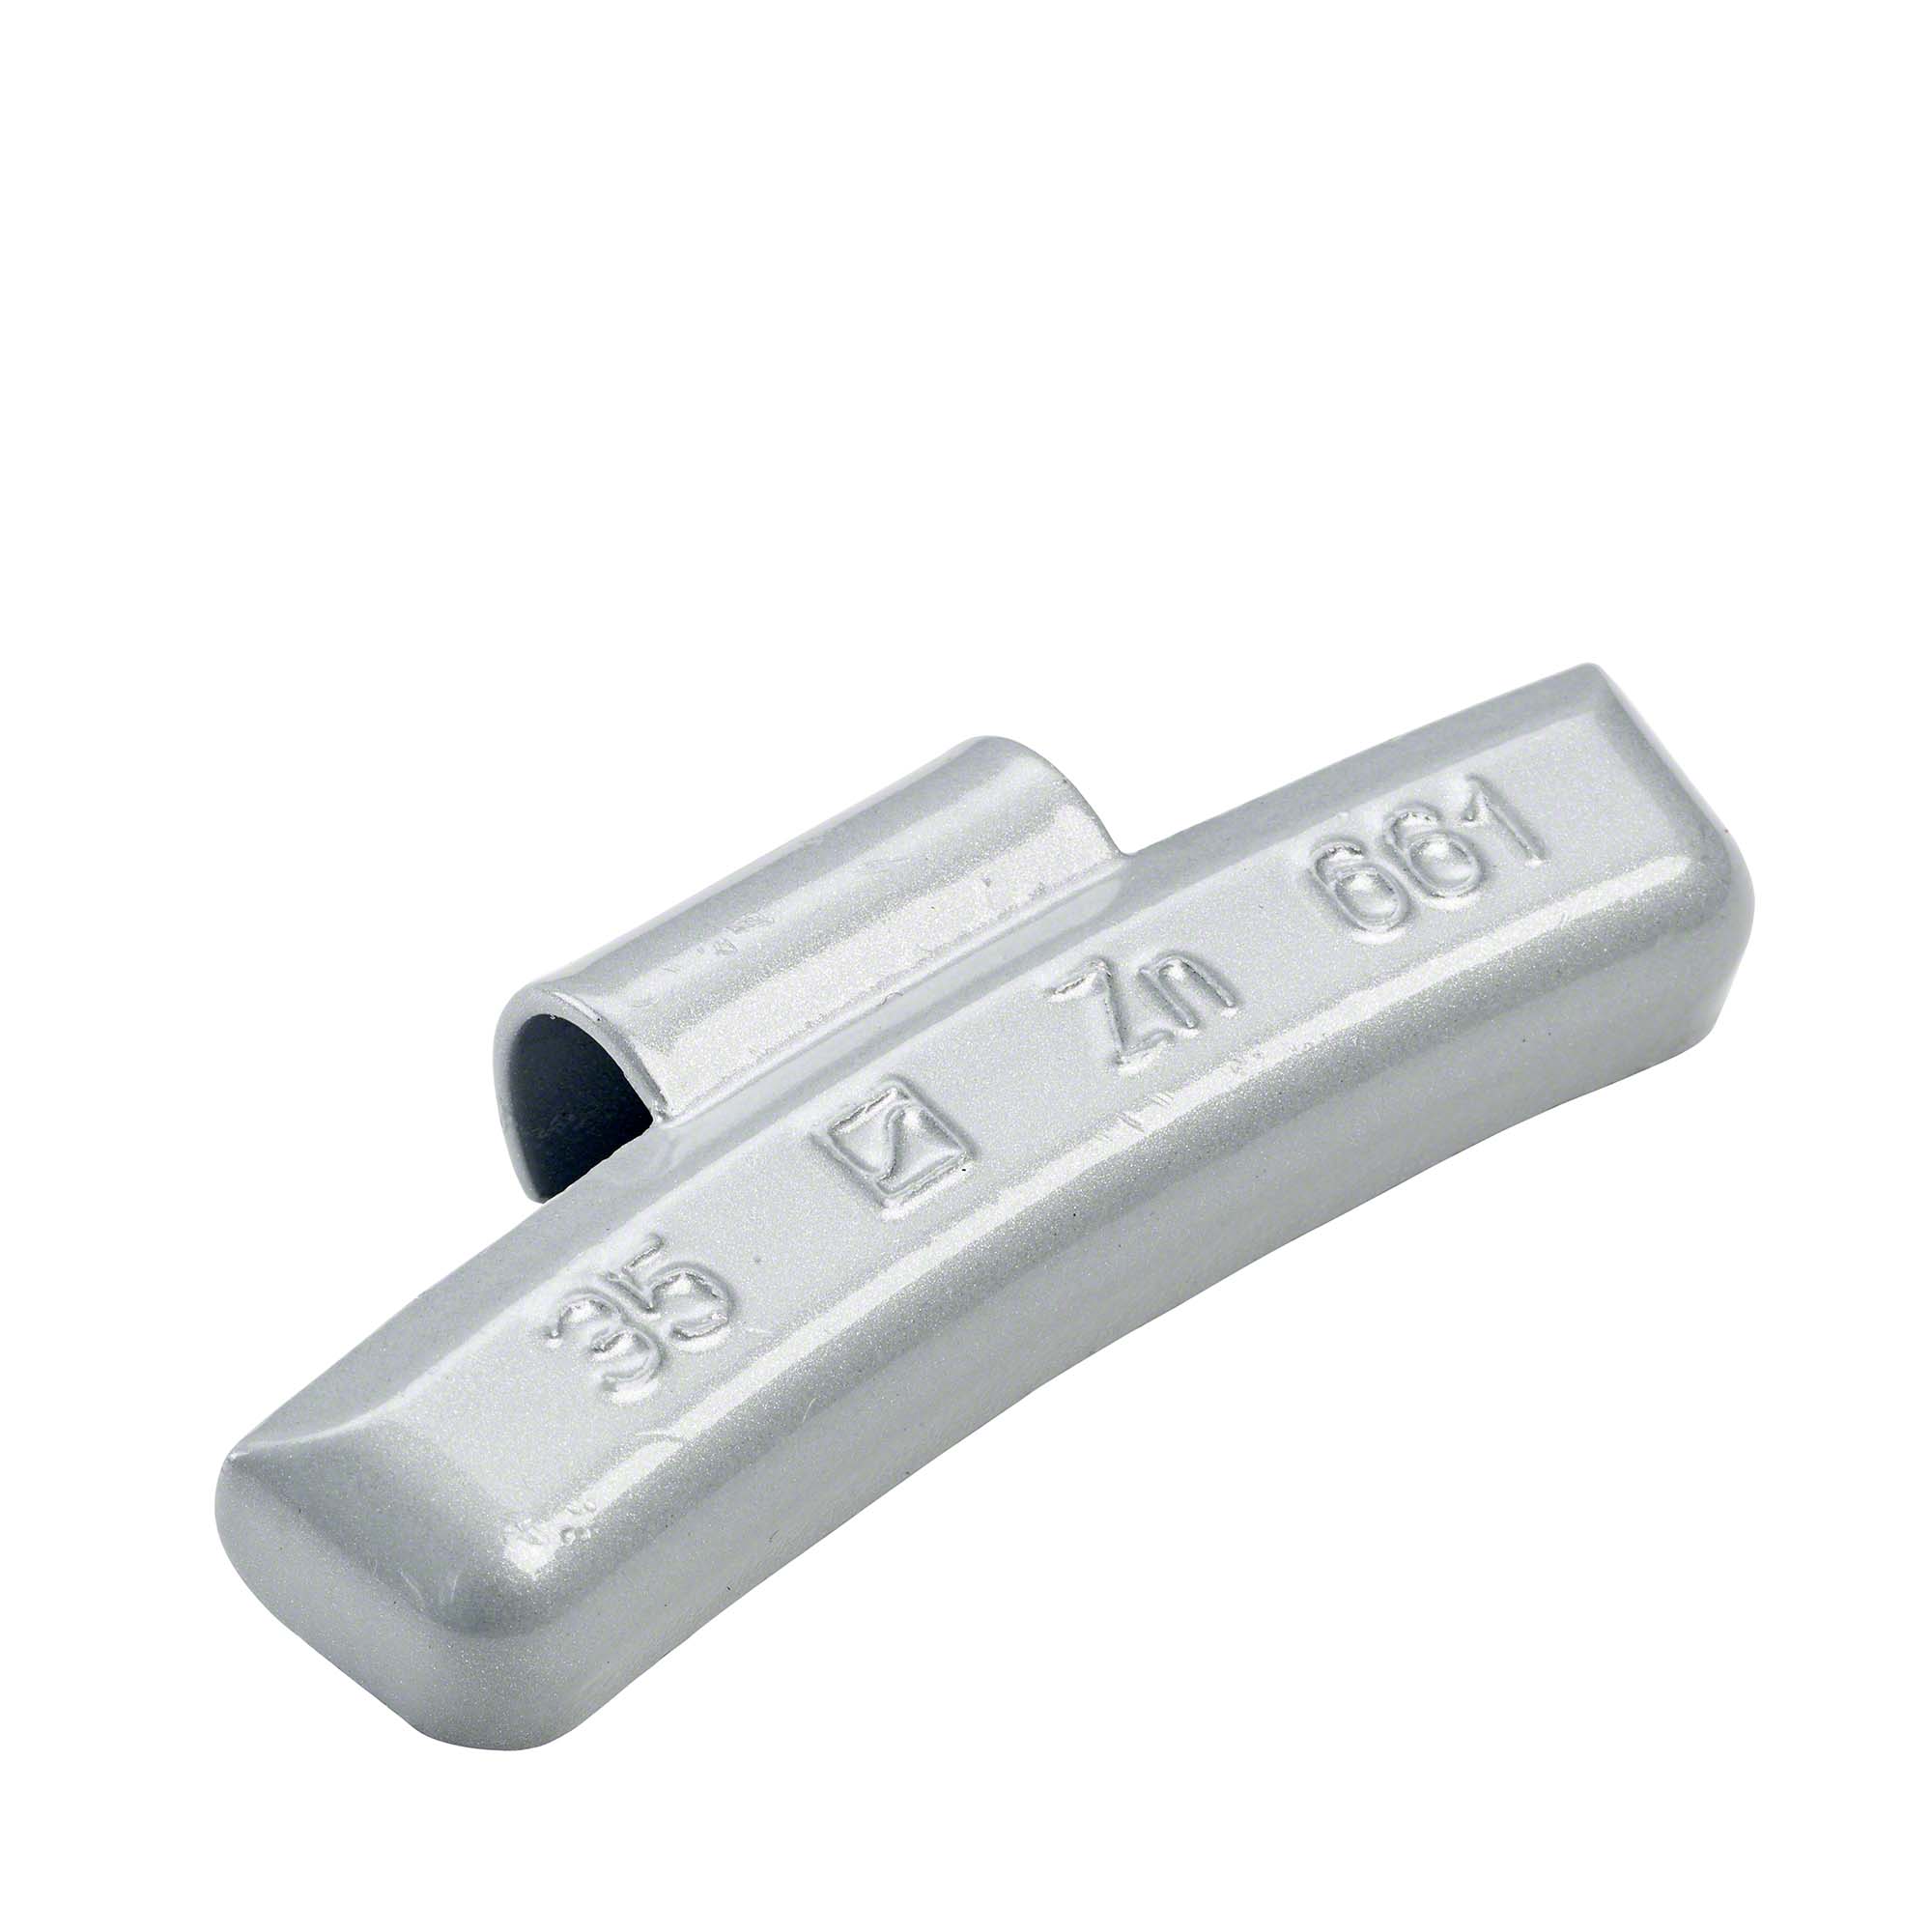 knock-on weight - Typ 661, 35 g, zinc, silver